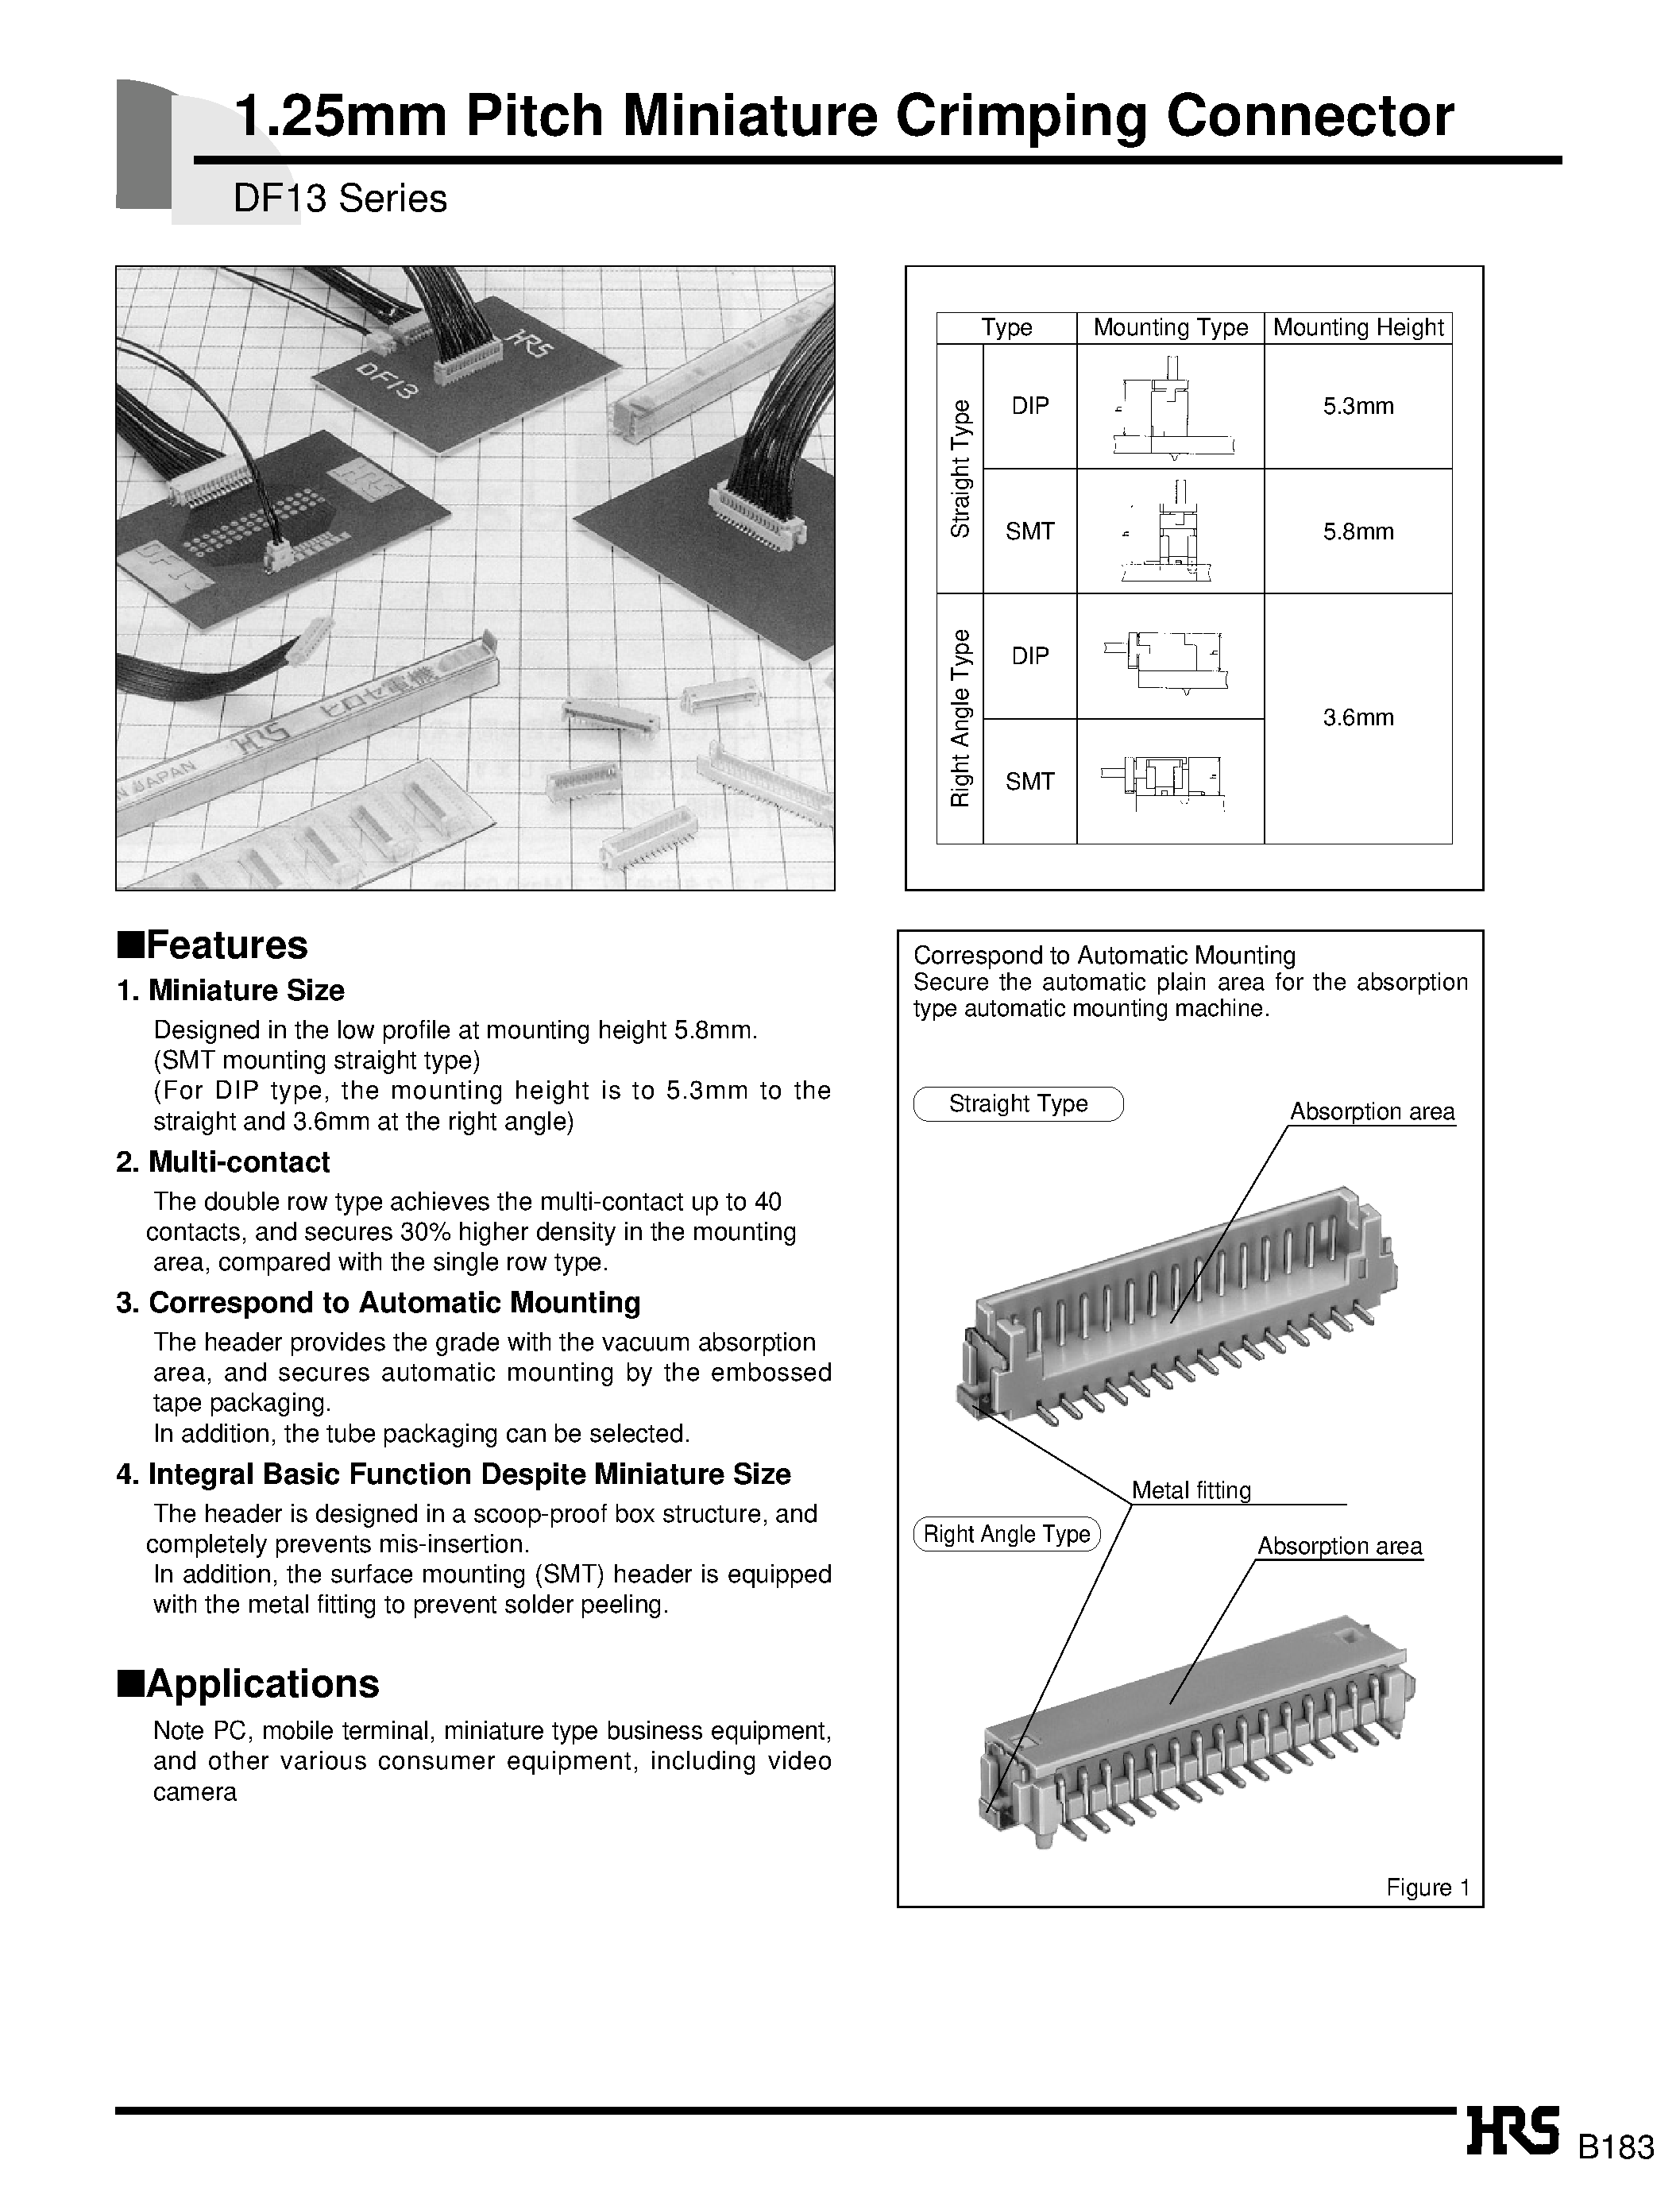 Datasheet DF13-10DP-1.25H - 1.25mm Pitch Miniature Crimping Connector page 1